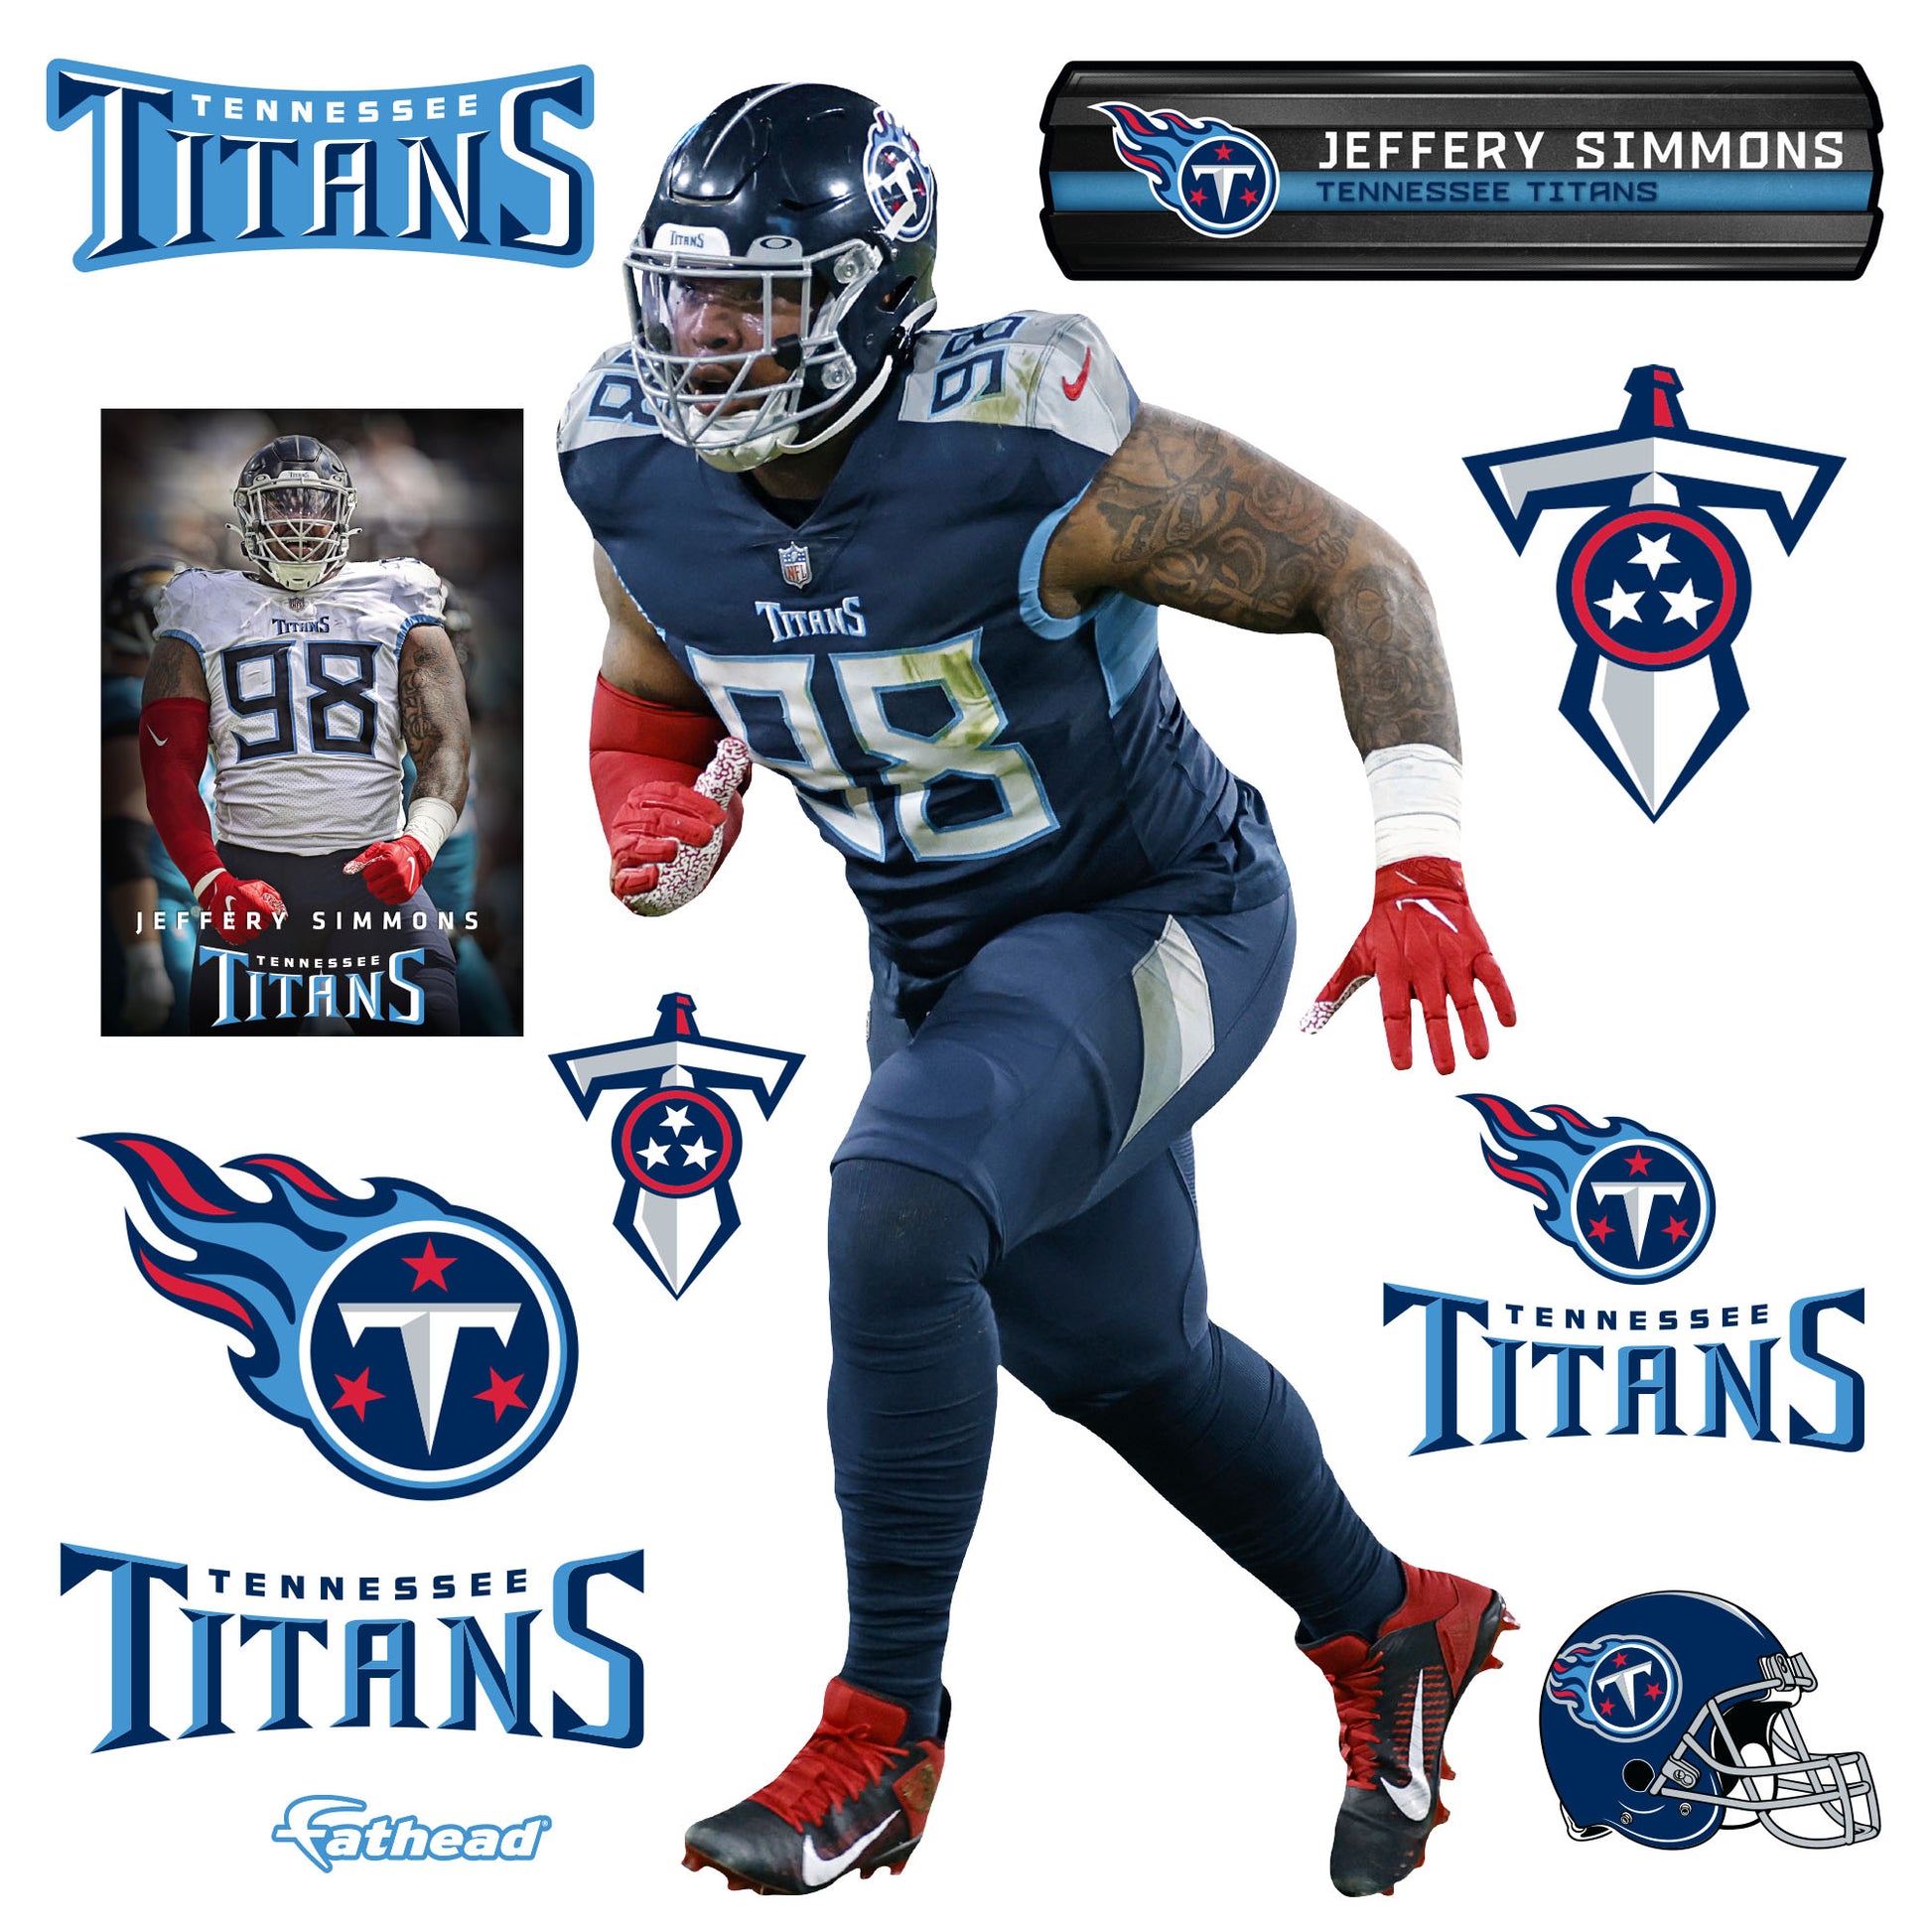 Tennessee Titans home field makes frictionless shopping play